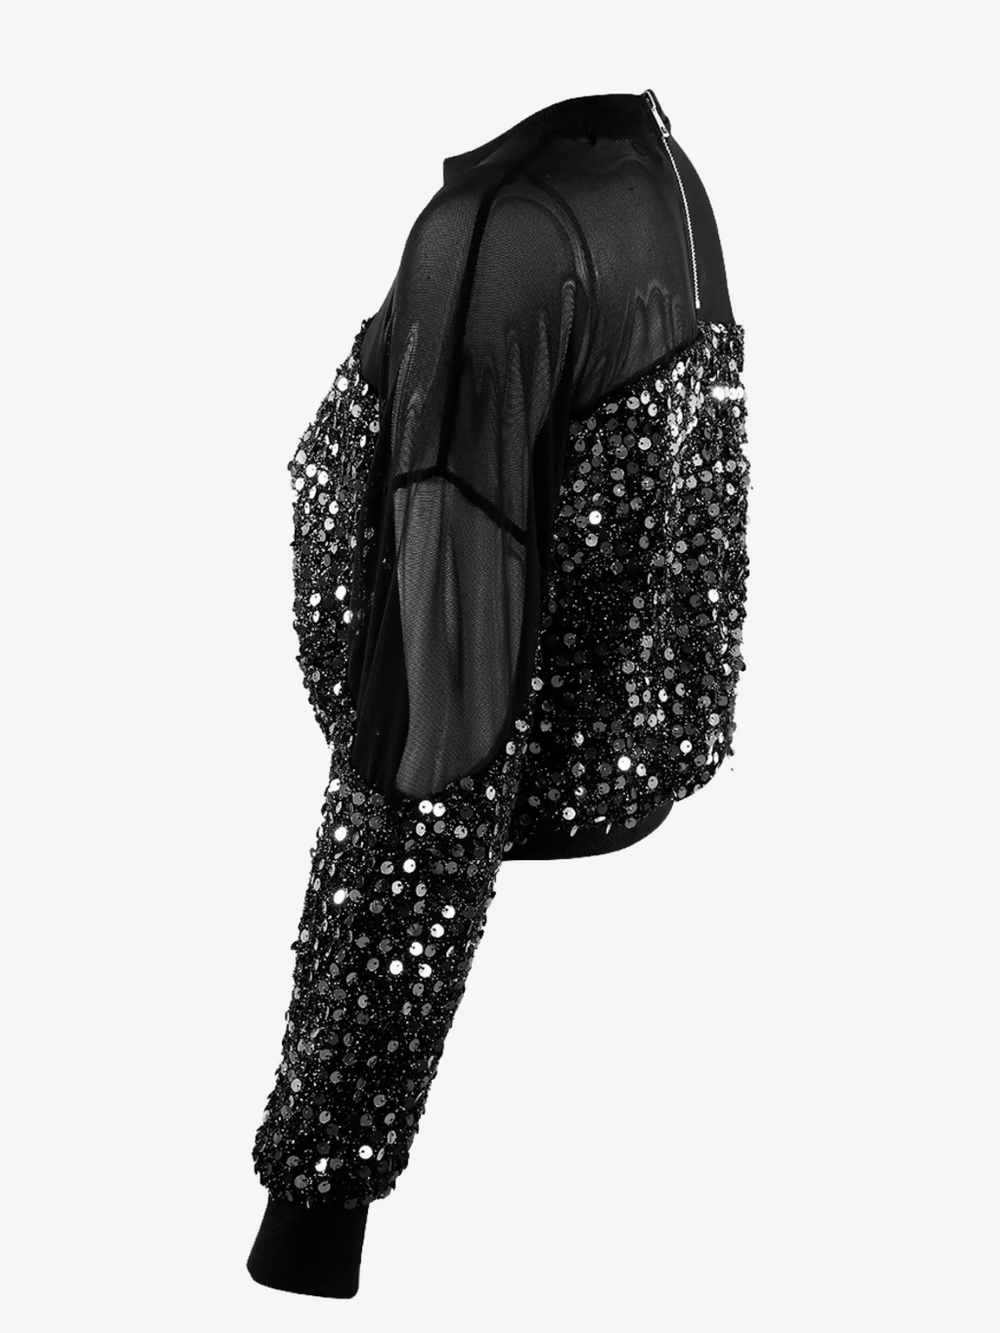 Ghost manequin wears a black Crop top with silver sequins and black mesh panelling at the top and sleeve.  The ghost manequin stands to the side, the front and the back of the manequin are visible, including  the exposed zip rear fastening.